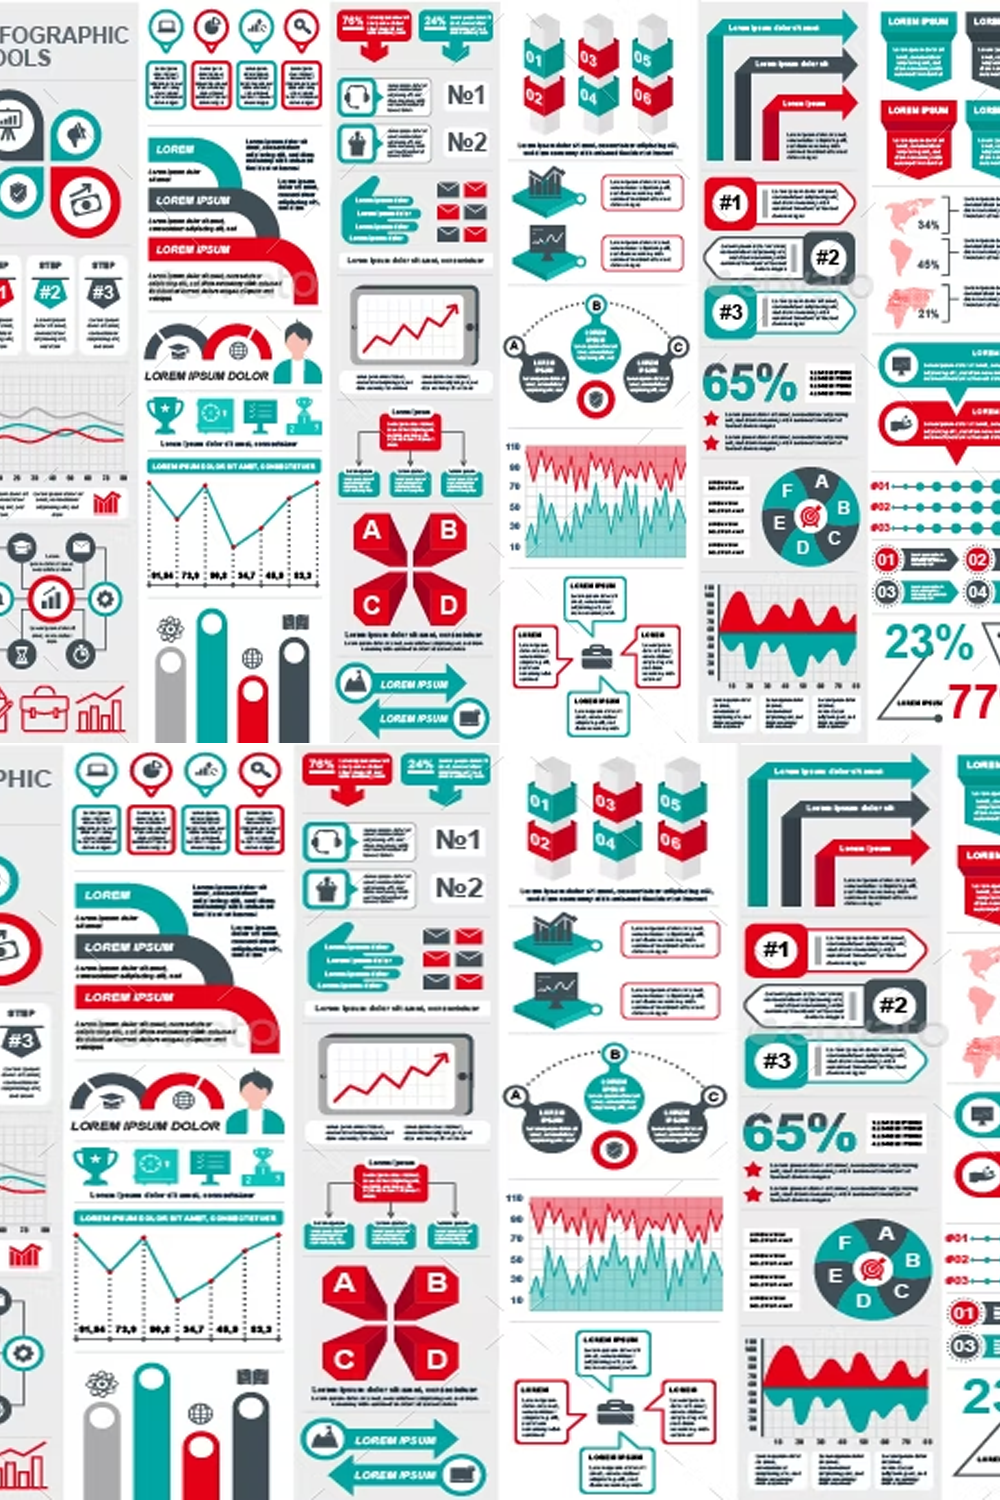 Illustrations business infographic elements of pinterest.